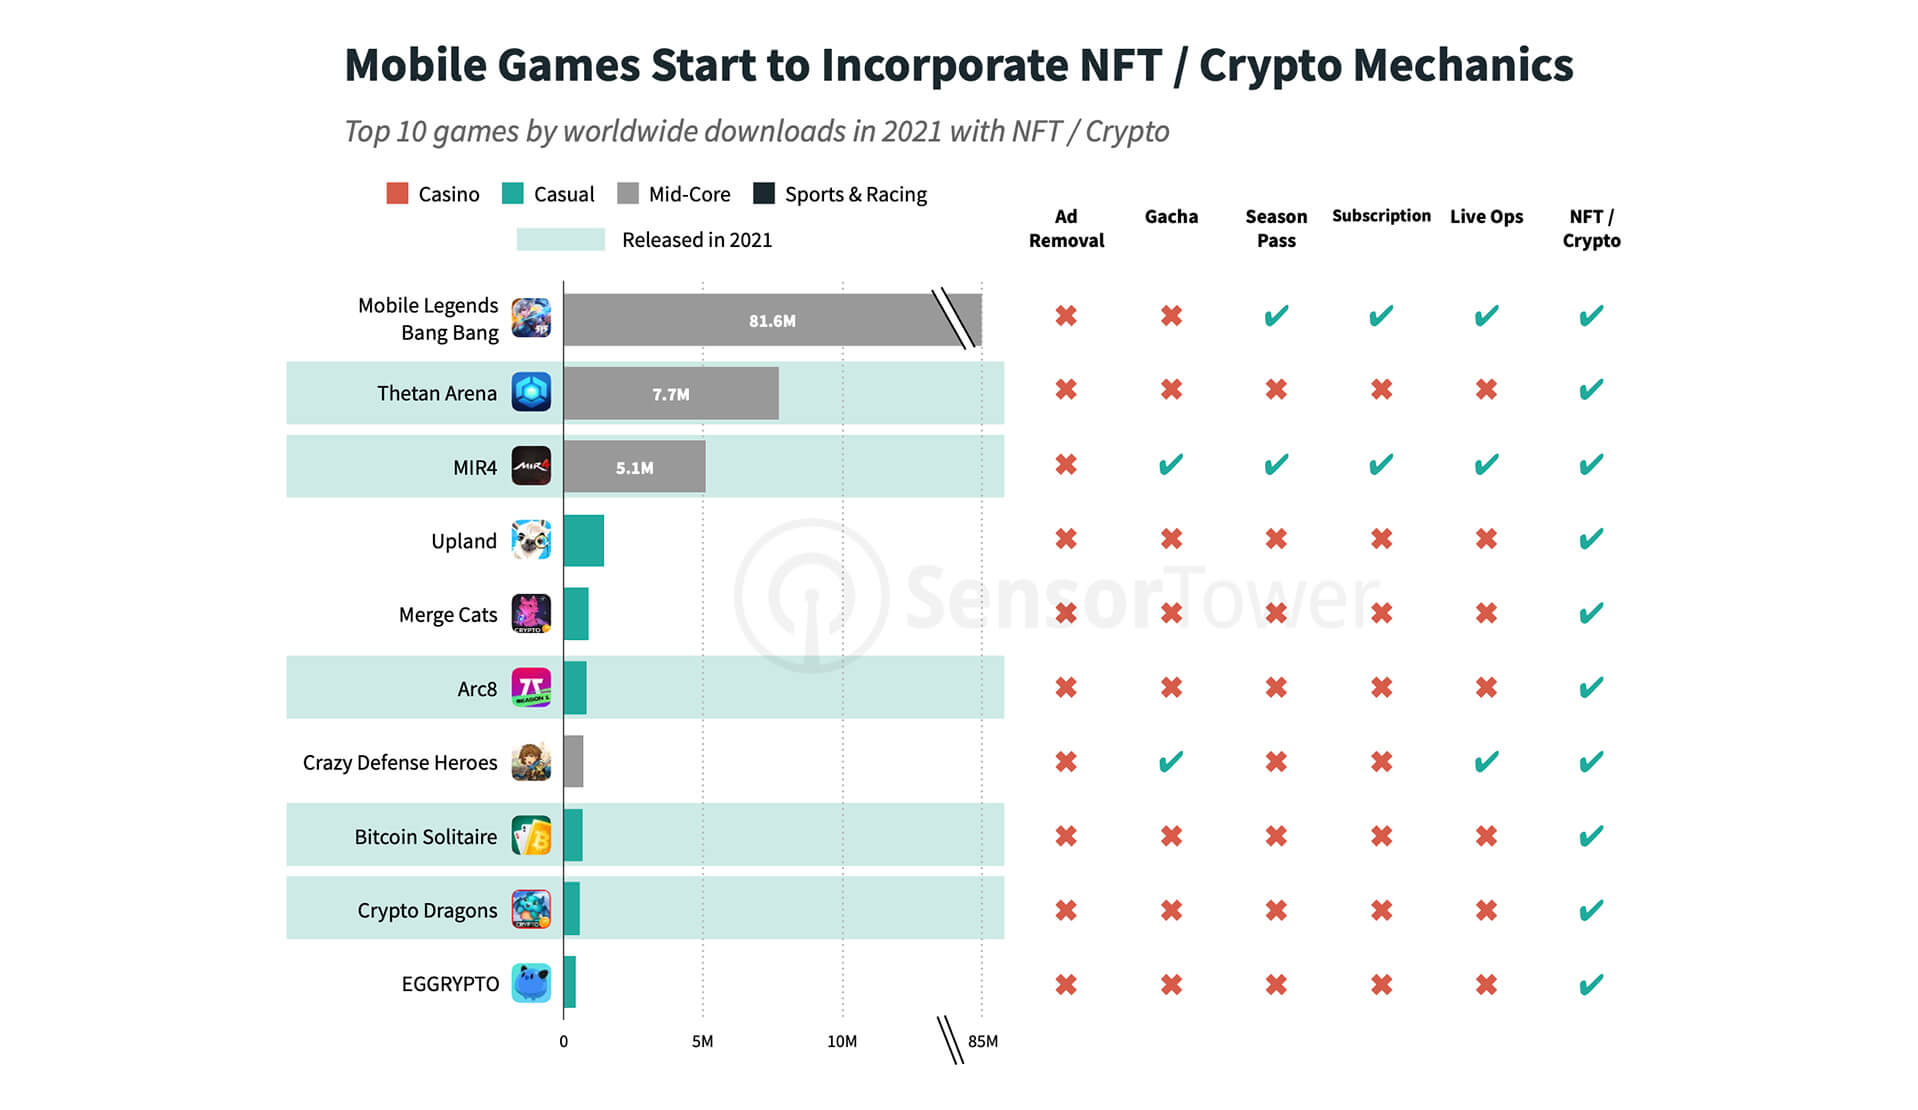 top-10-games-by-worldwide-downloads-in-2021-nft-crypto-gdc-2022